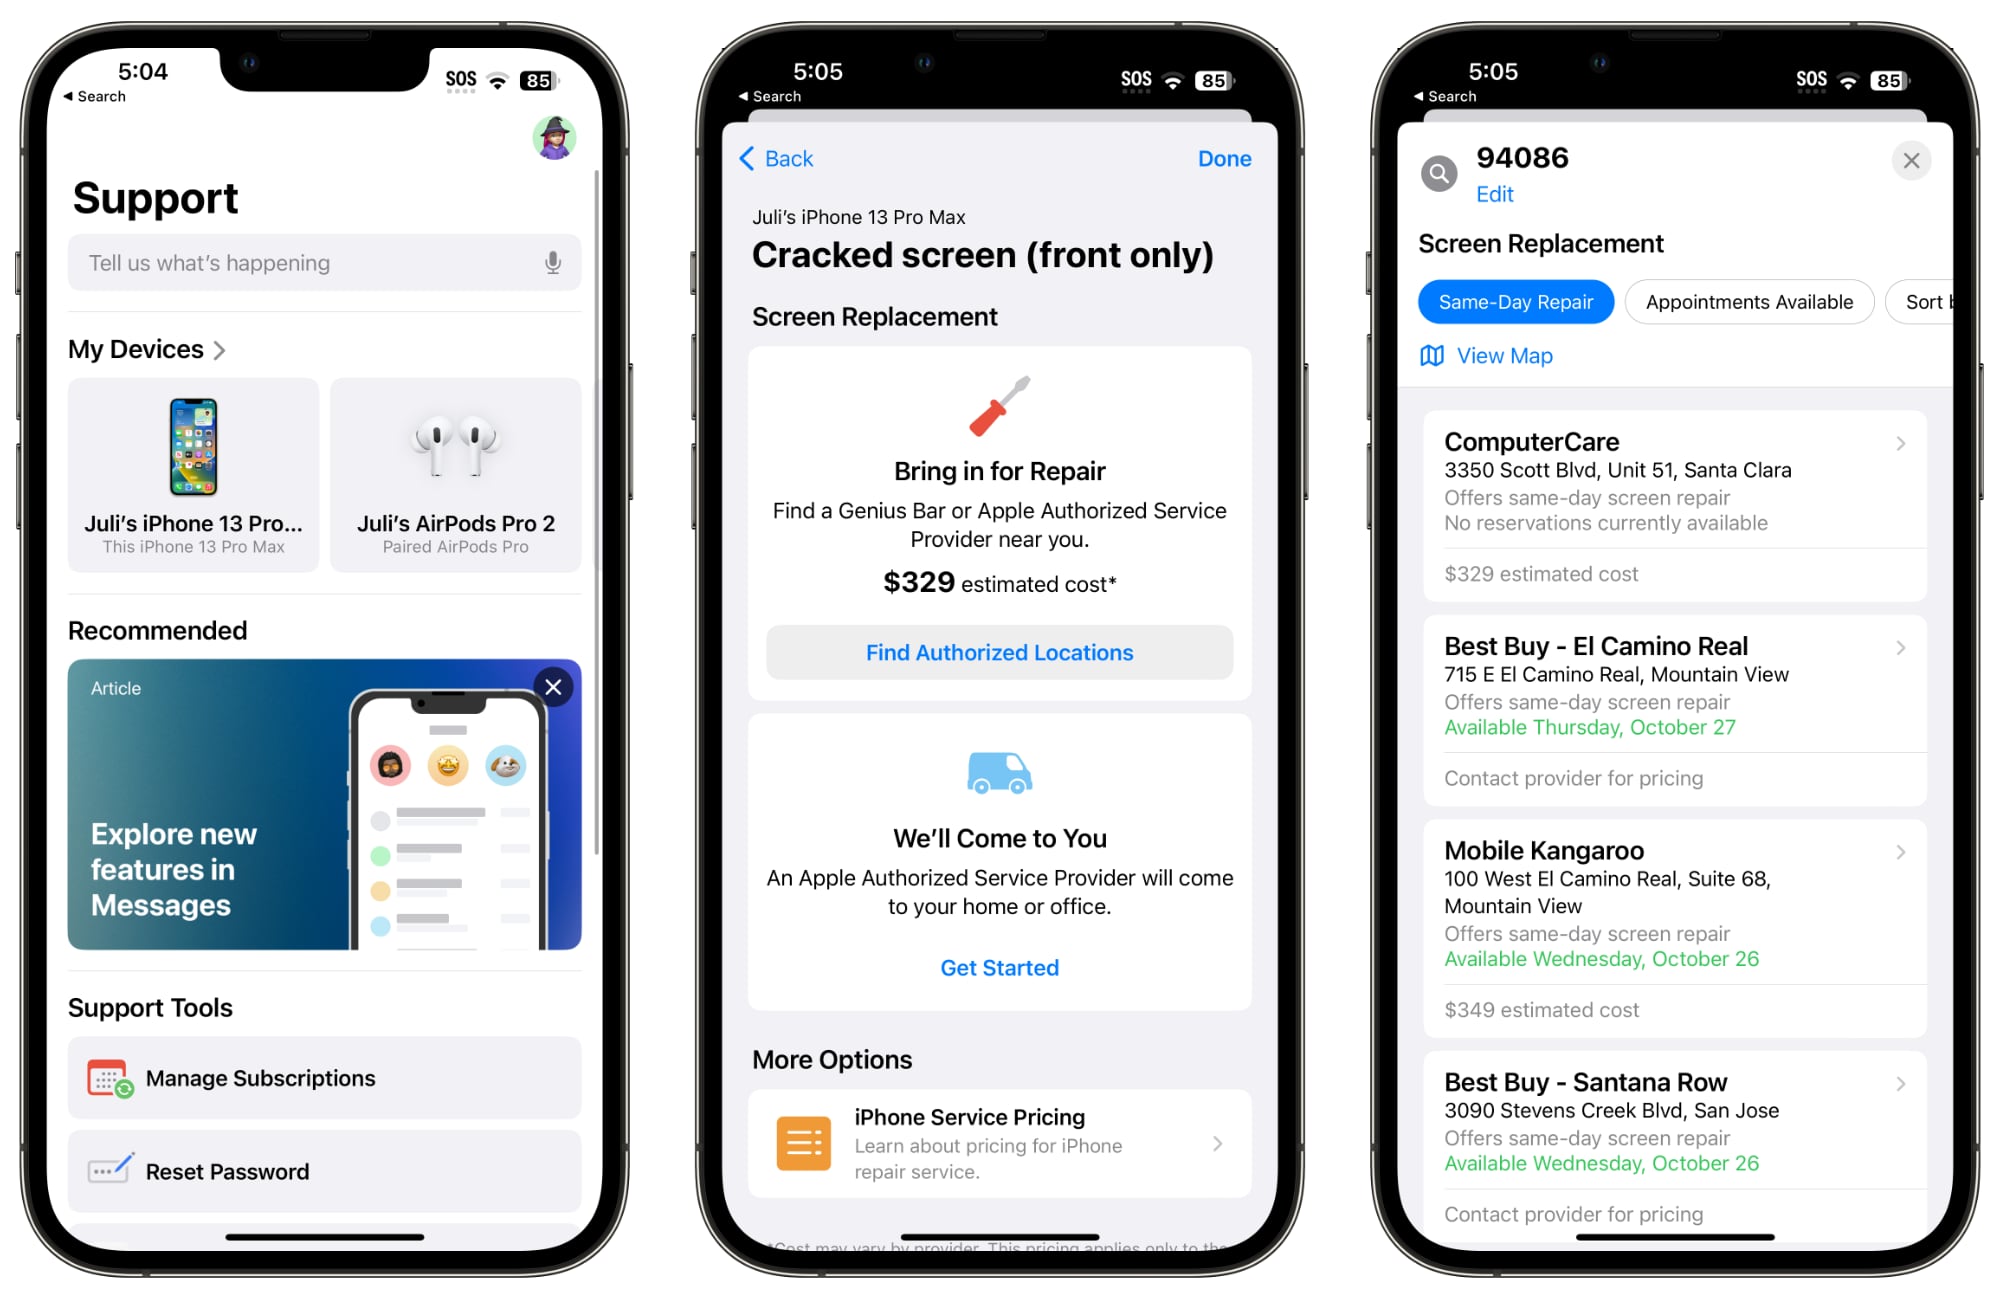 Apple Support App Gains New Look and Revamped Reservation System